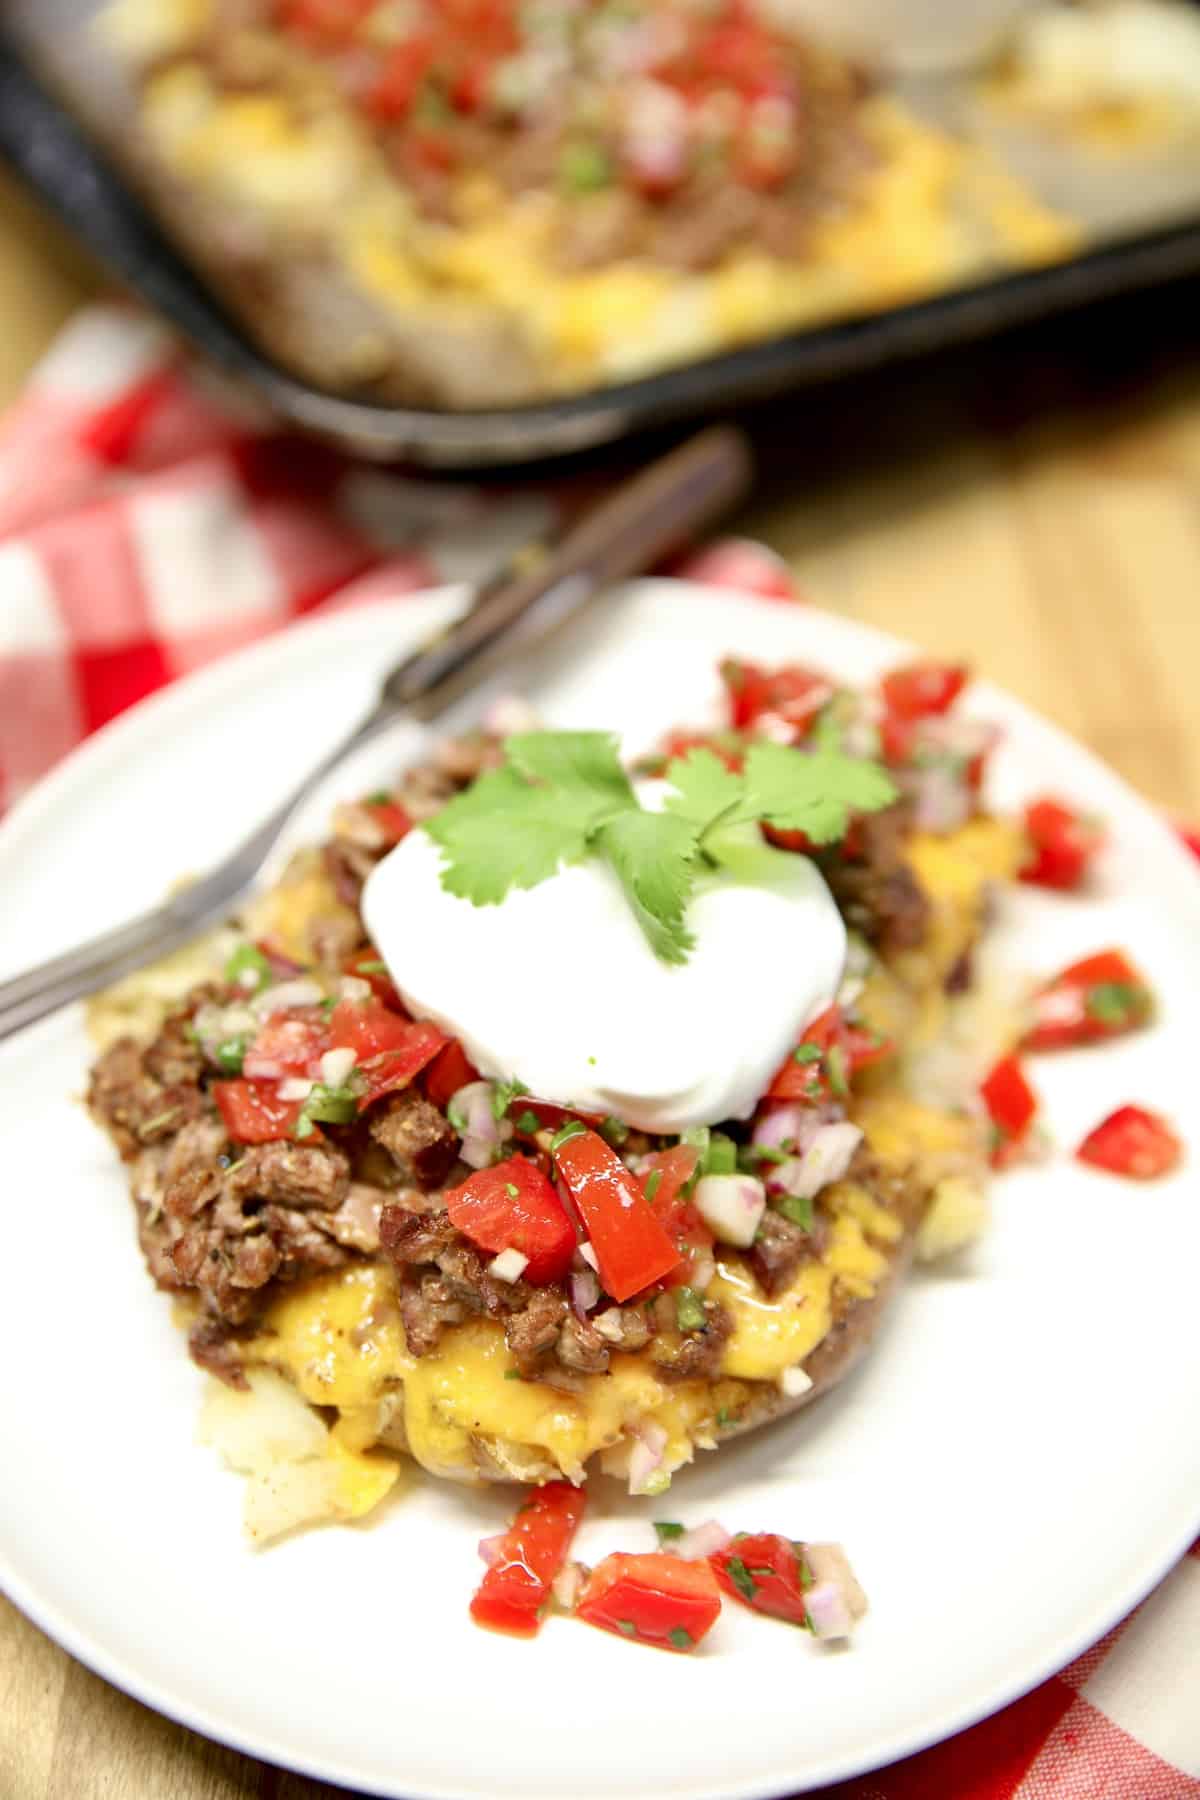 Loaded smashed potatoes with salsa fresca and sour cream.